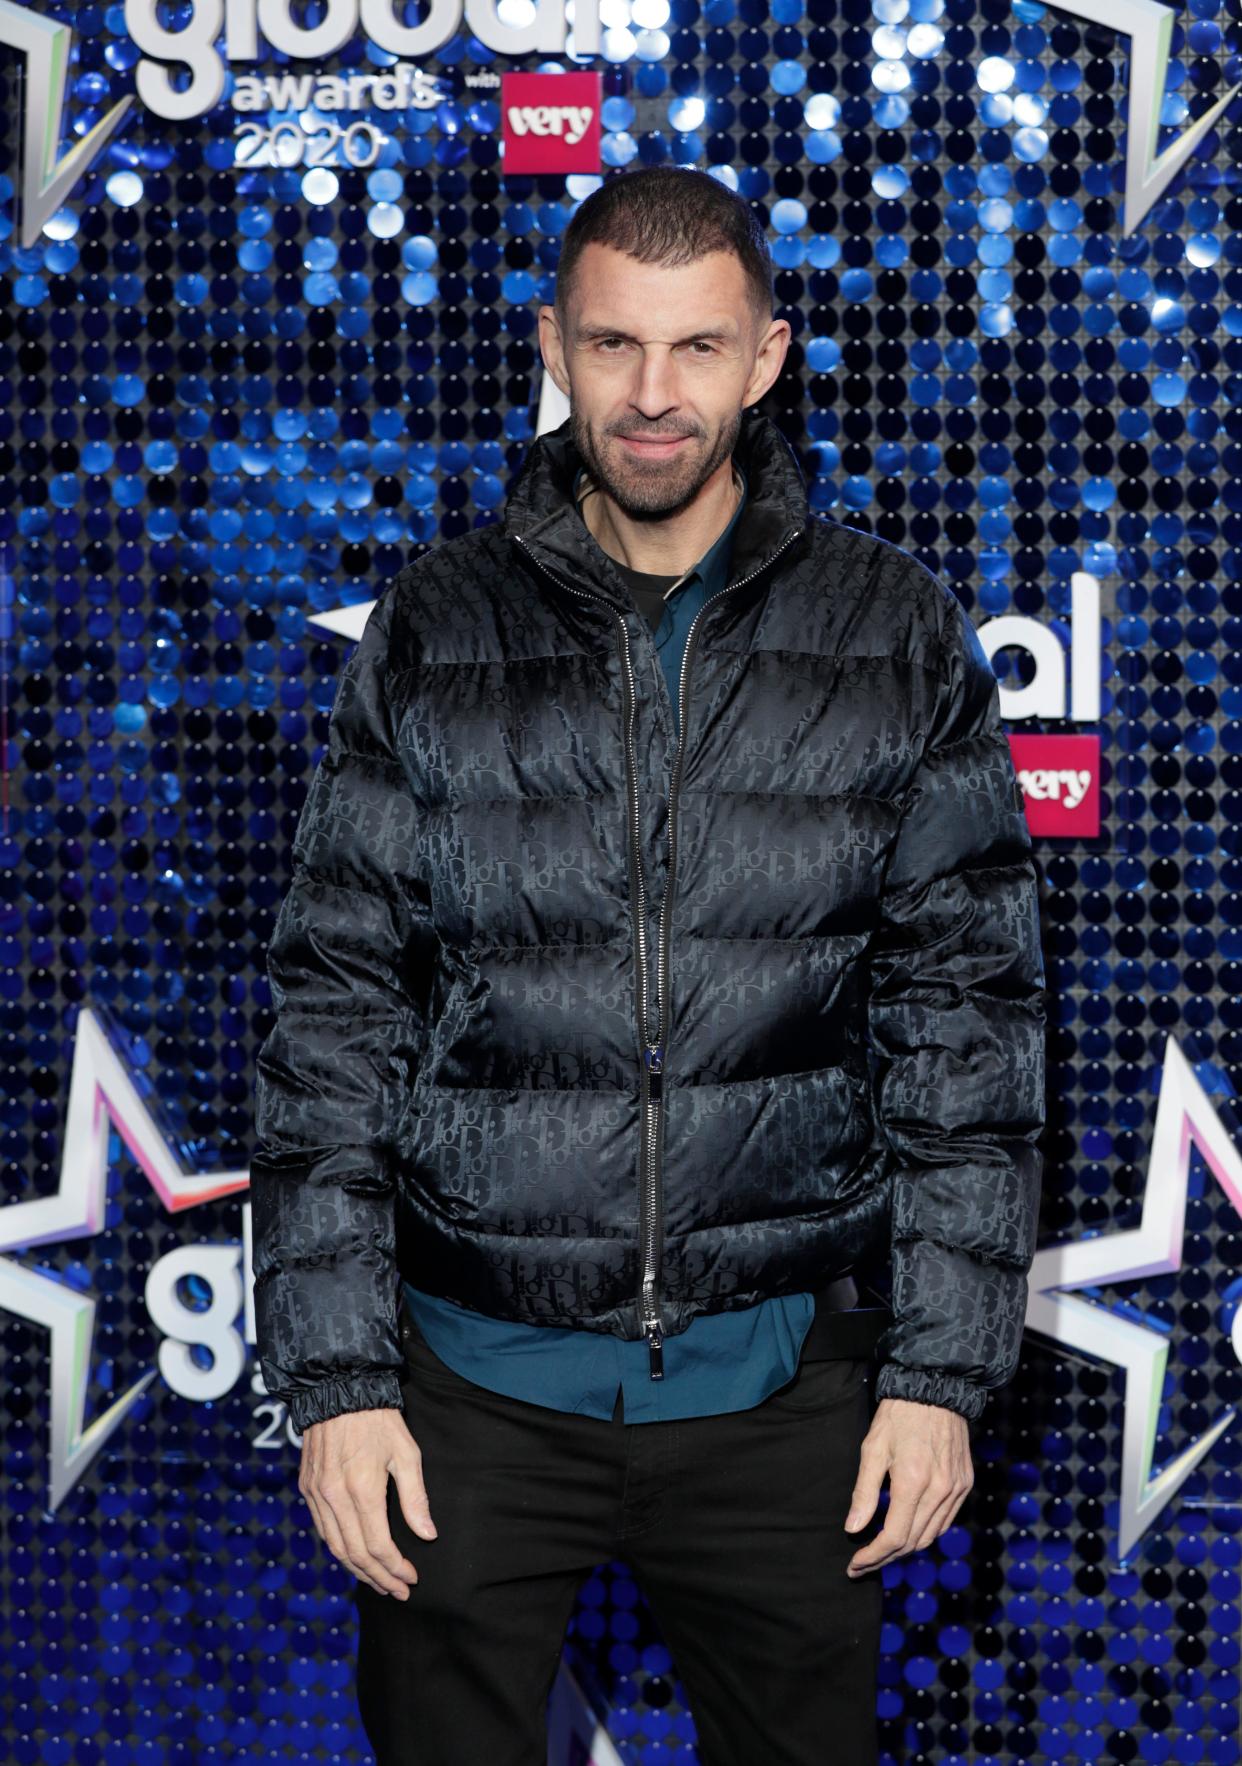 Tim Westwood attends The Global Awards 2020 on March 5, 2020. The British DJ has been accused of sexual misconduct by seven women.